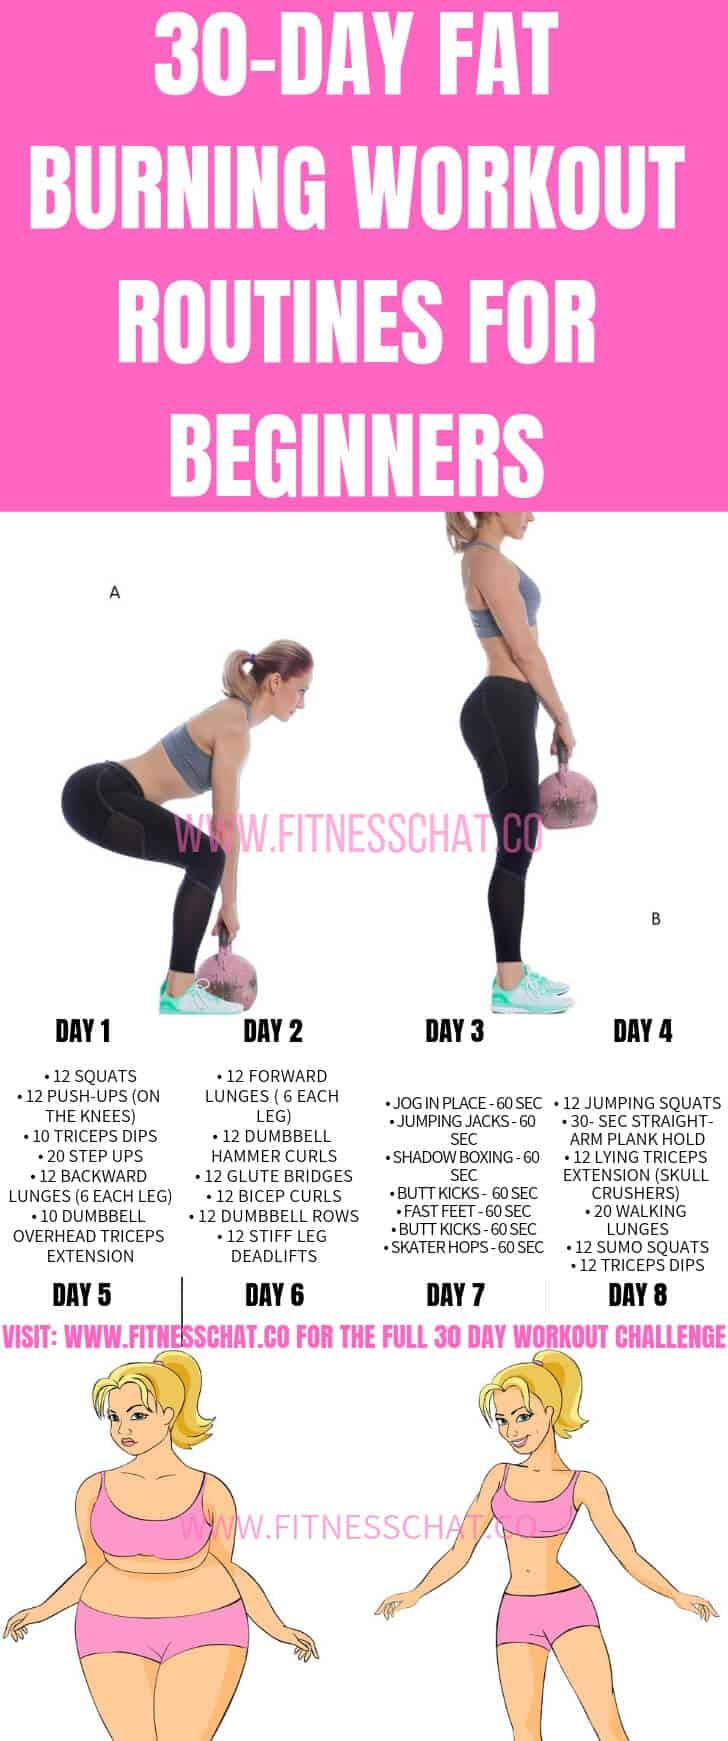 30 Day Fat Burning Workout
 30 Day Fat Burning Workout Routines for Beginners